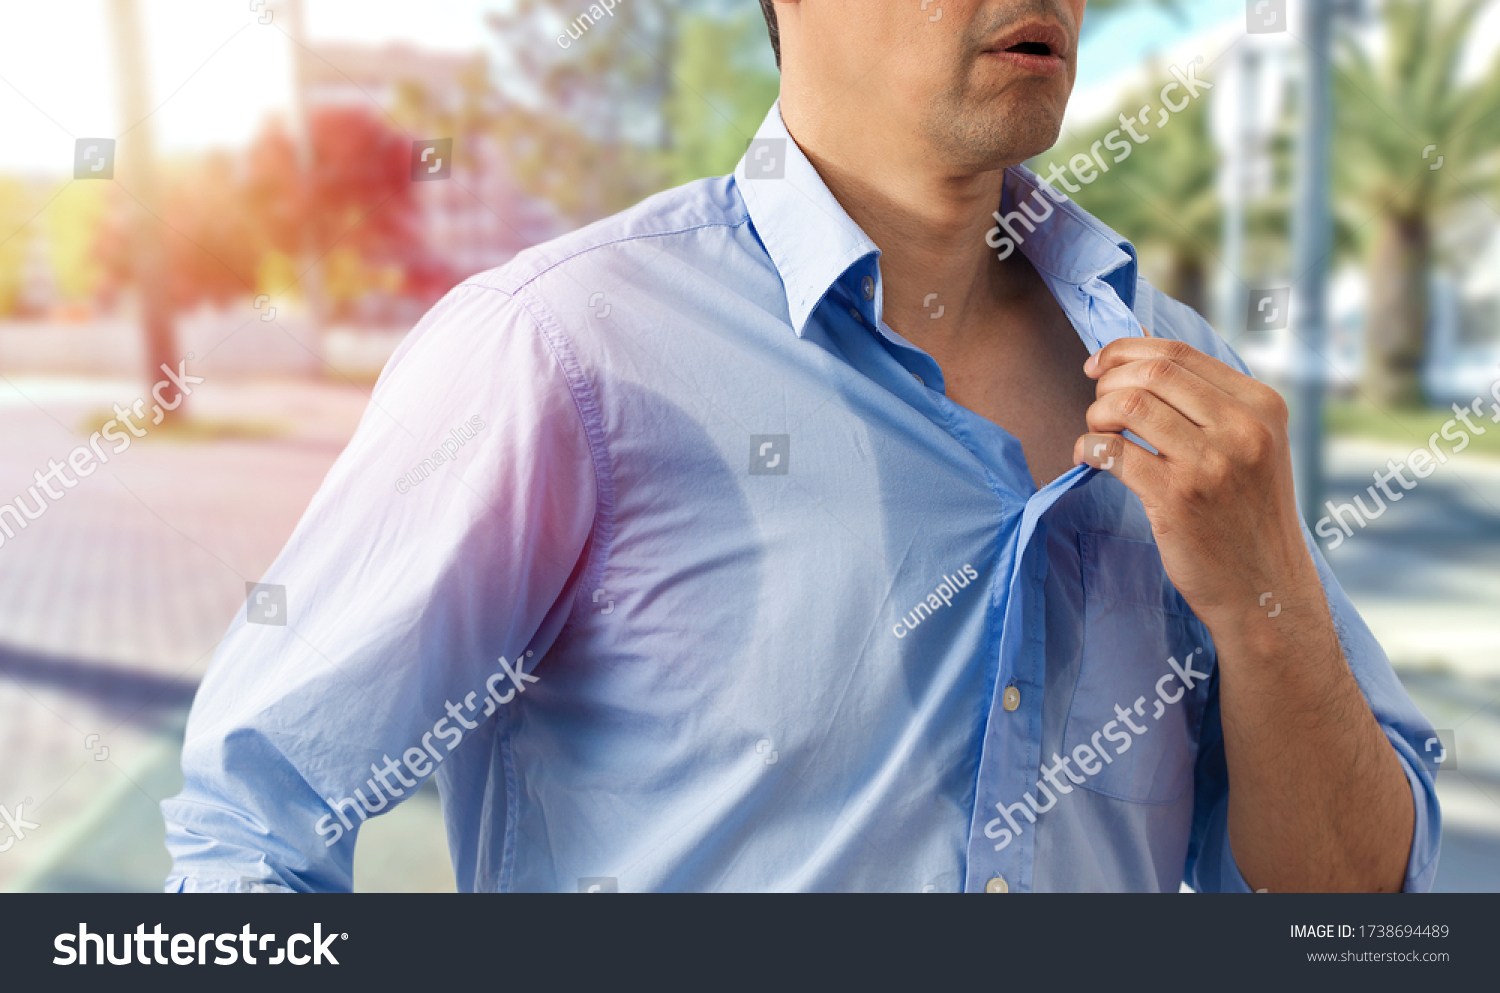 Shot of an unrecognizable man undressing because of the heat and sweat on a hot summer day #1738694489